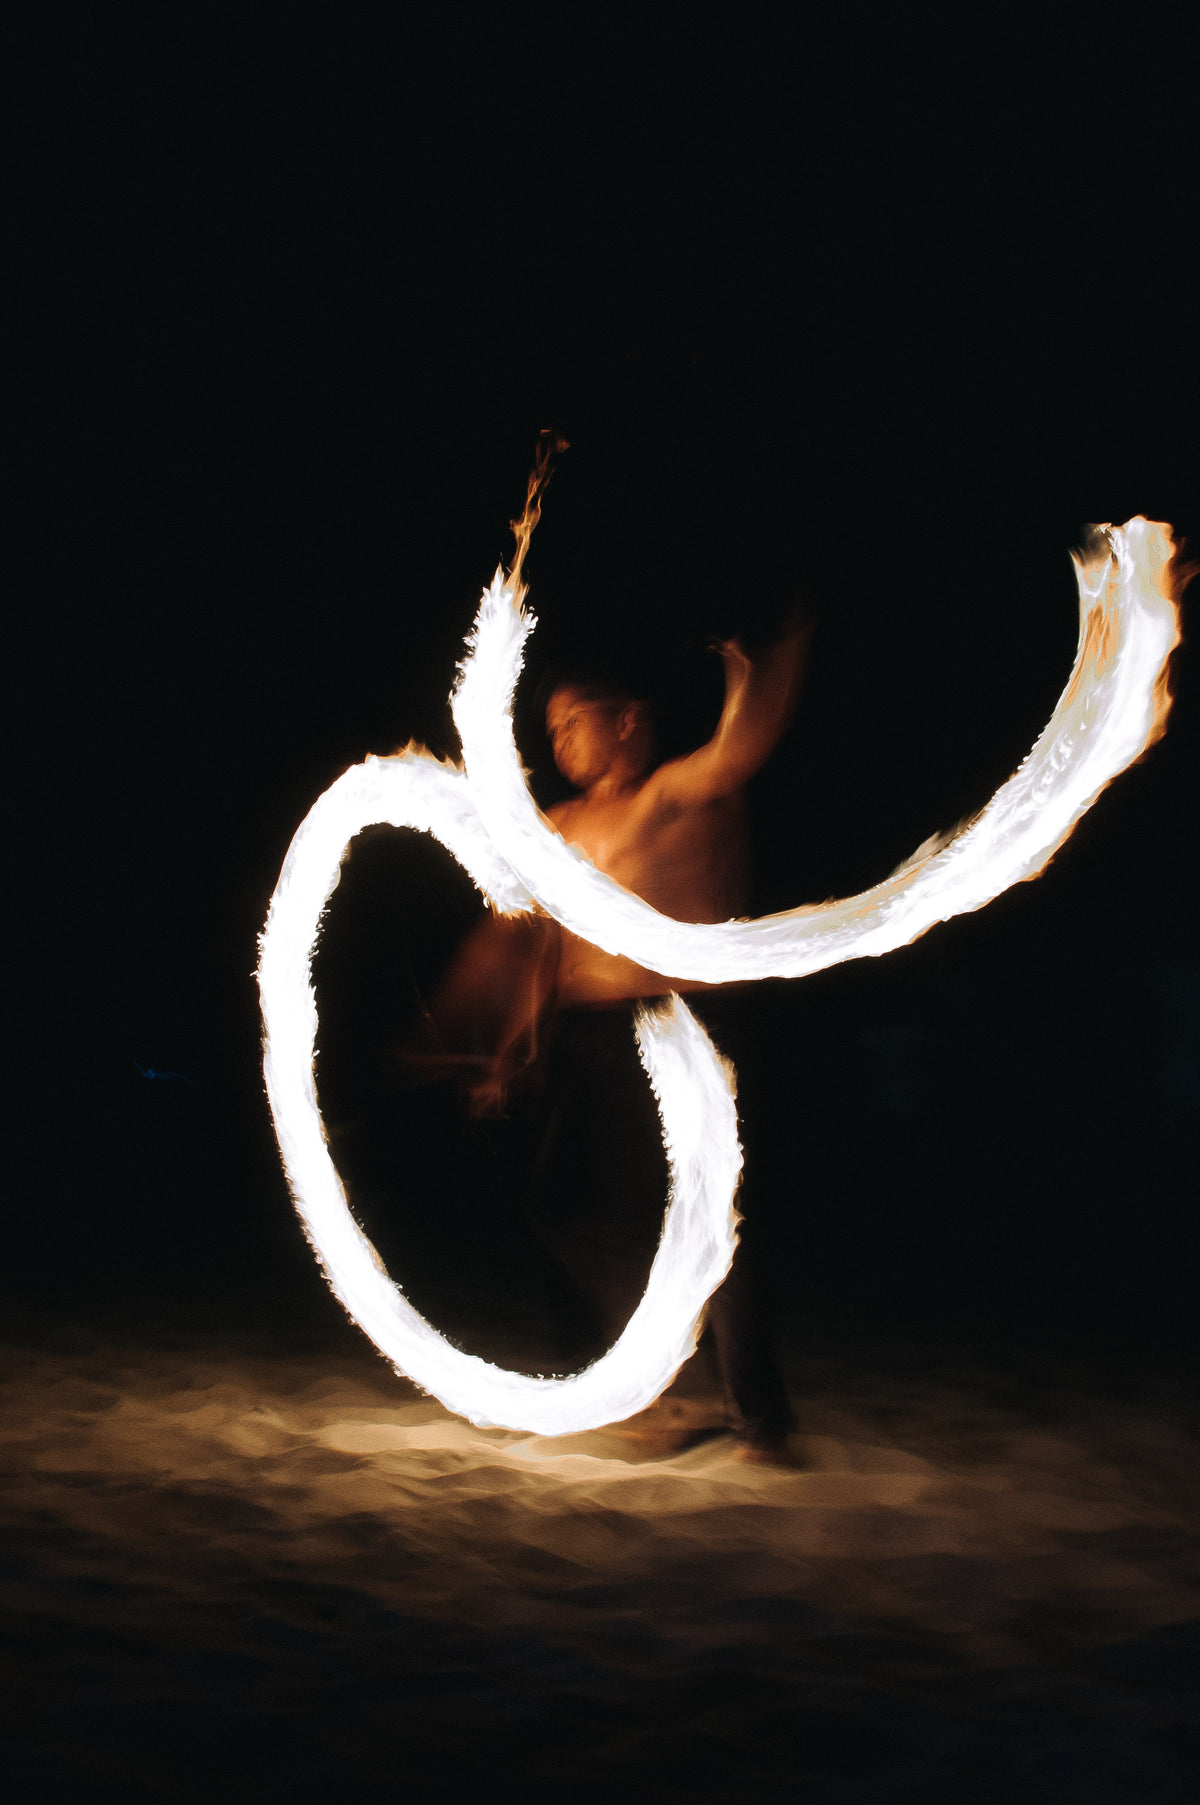 a fire dancer cuts figures of eight at night on a beach